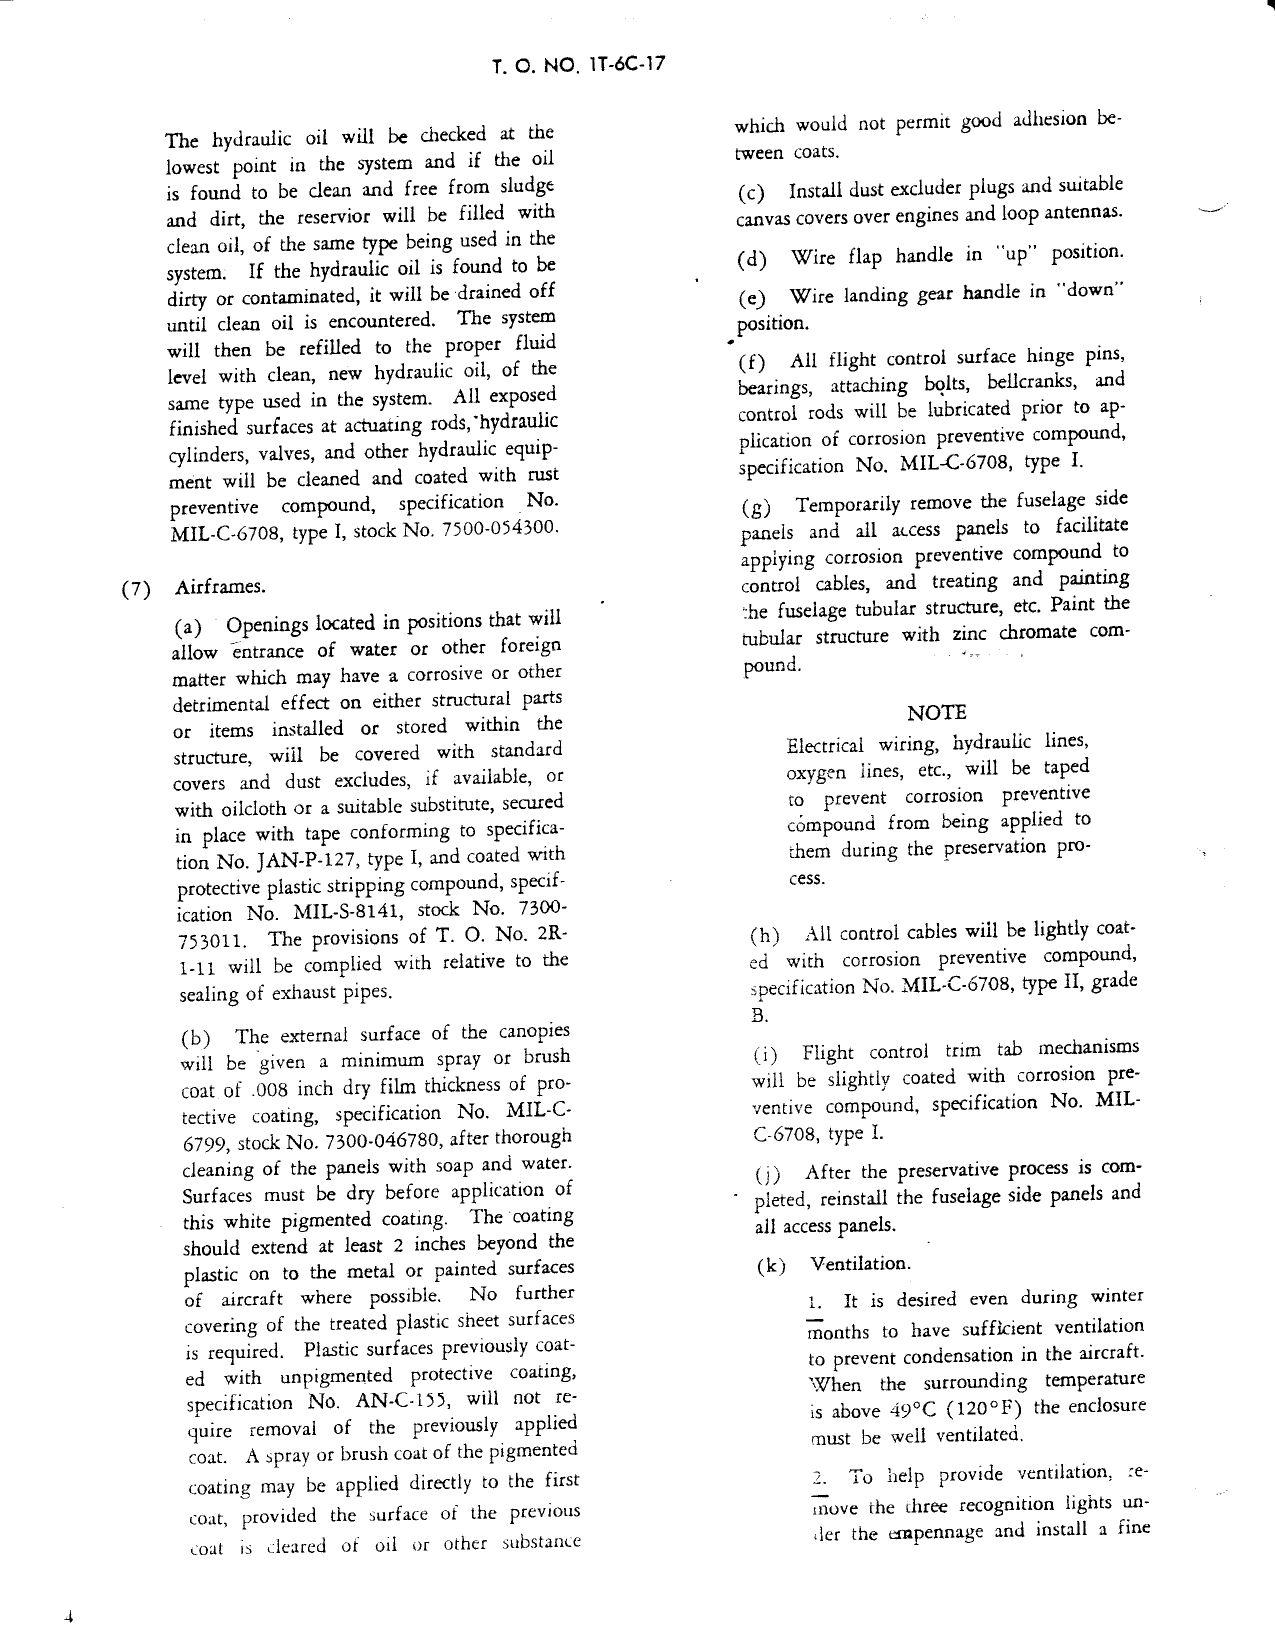 Sample page 4 from AirCorps Library document: Storage of Aircraft, T-6 Series